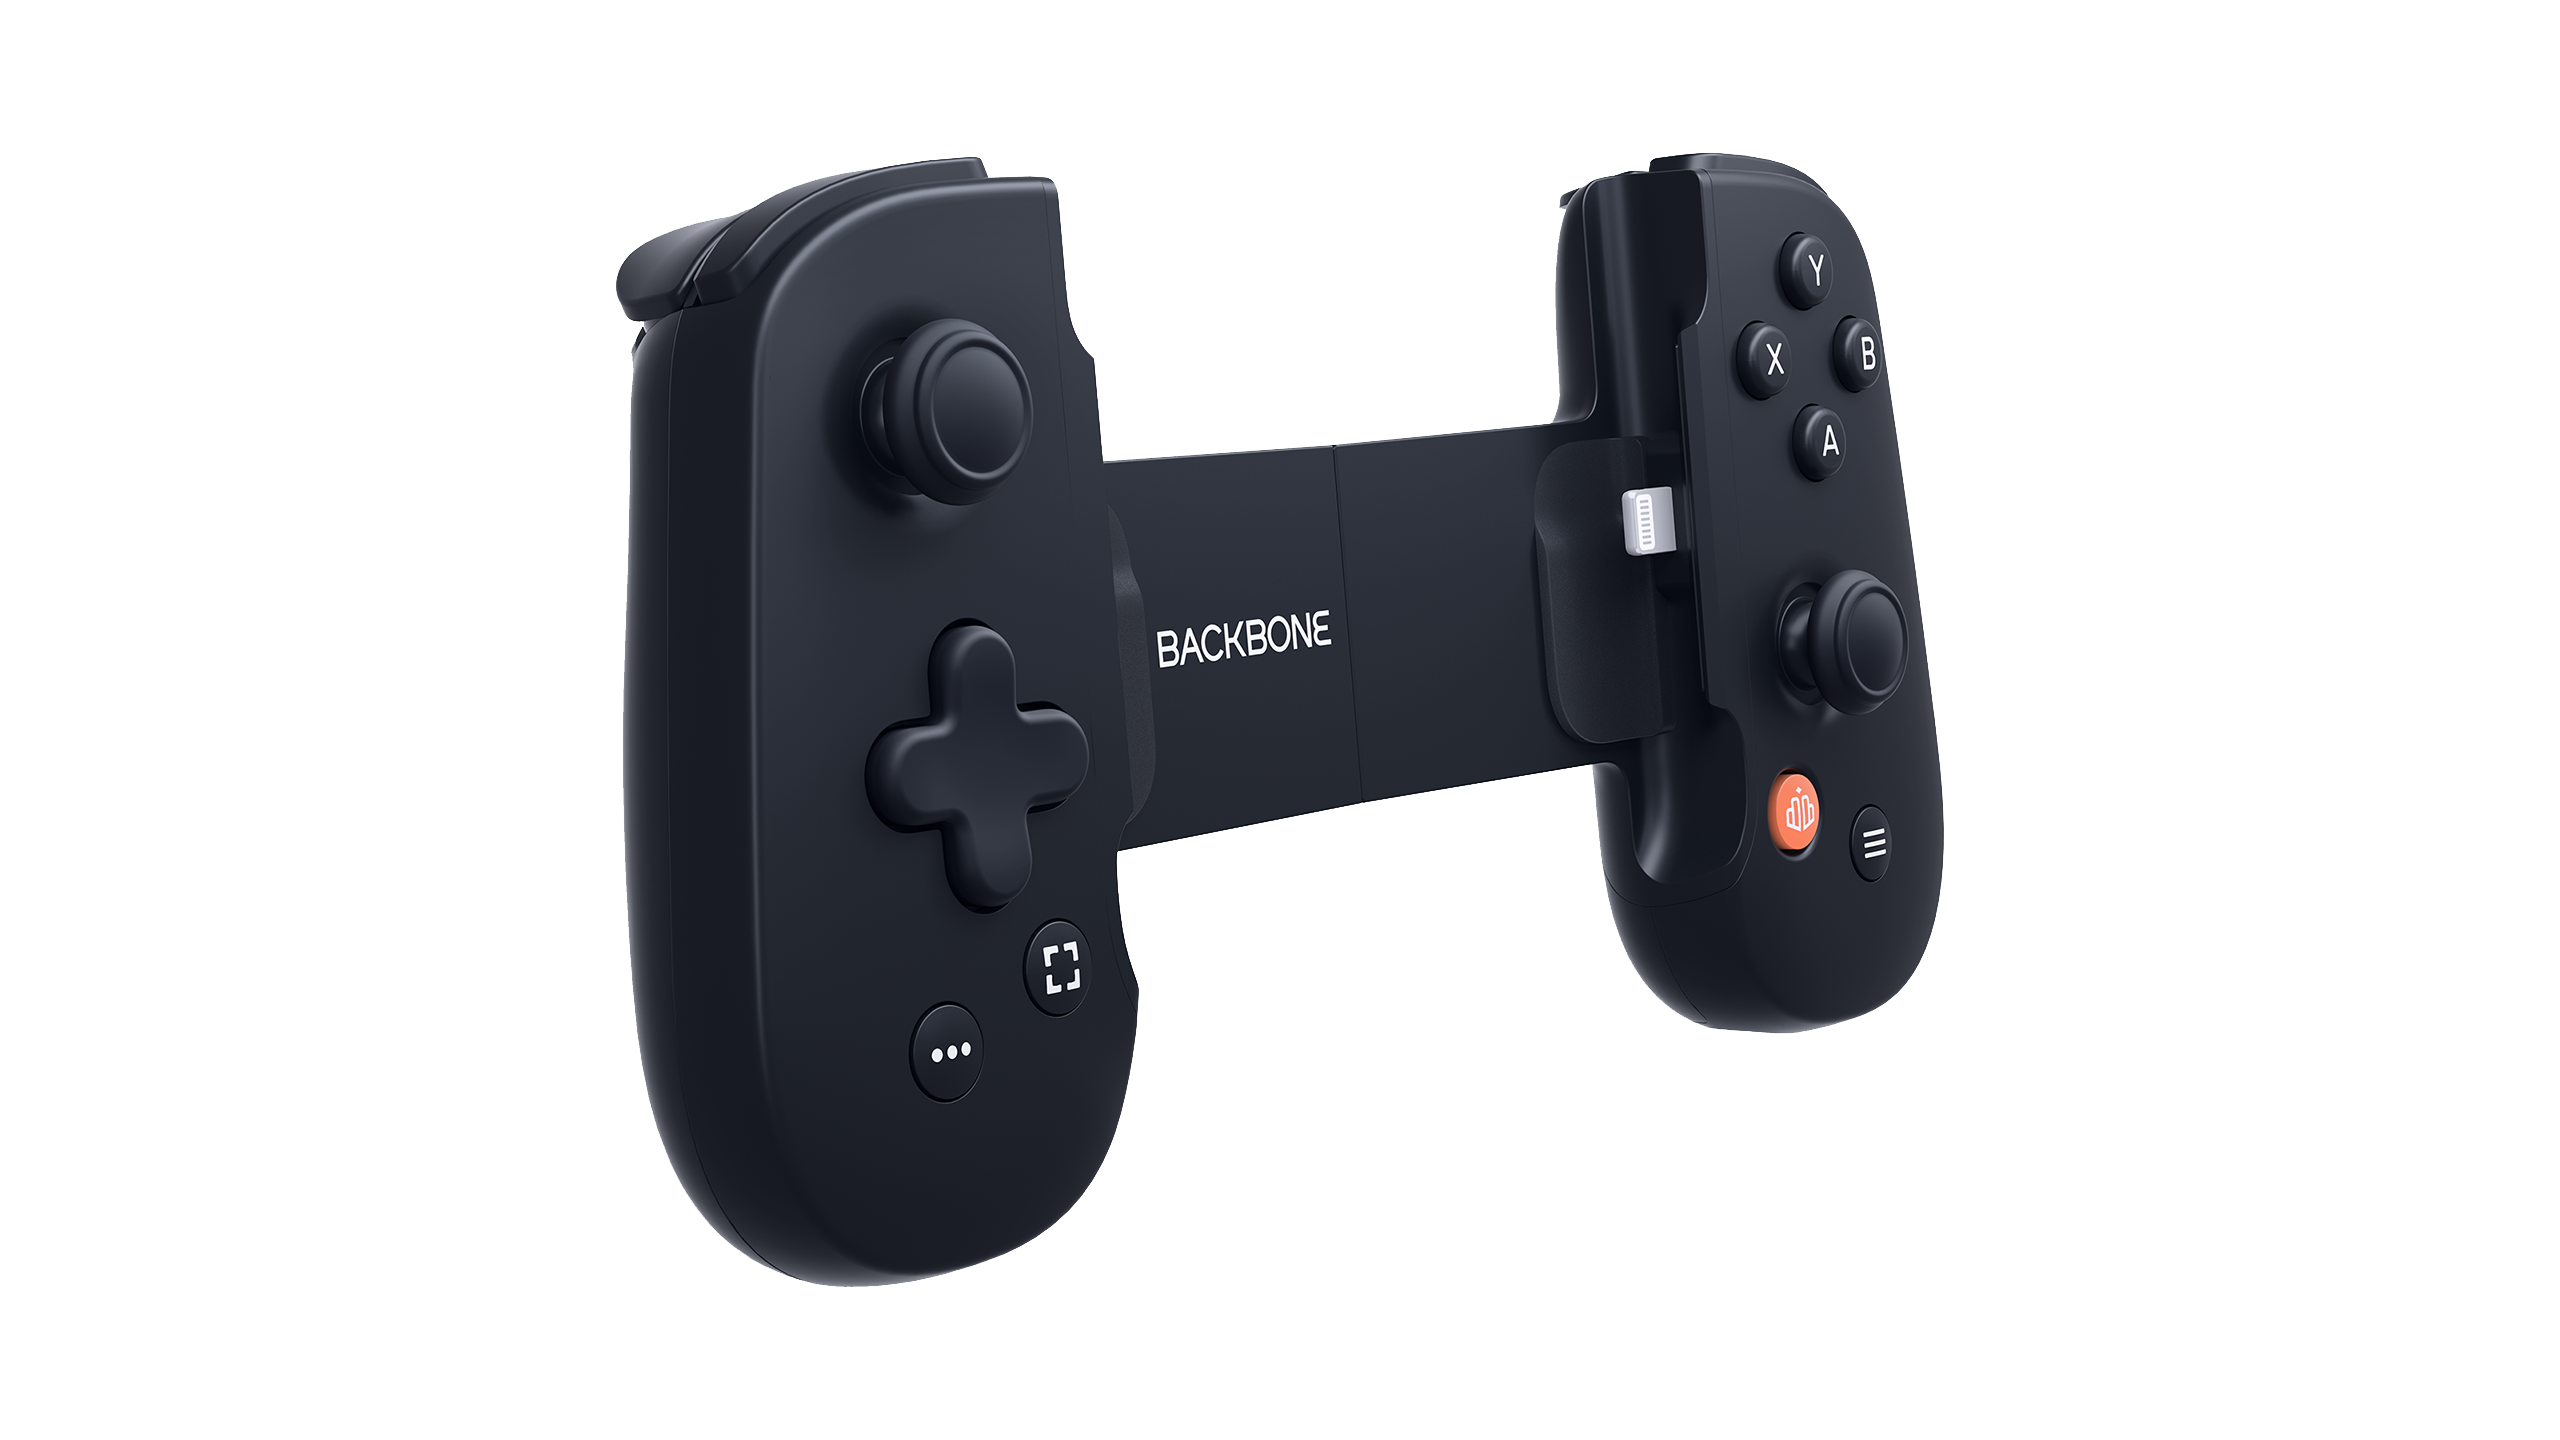 The Backbone mobile game controller is now available for Android